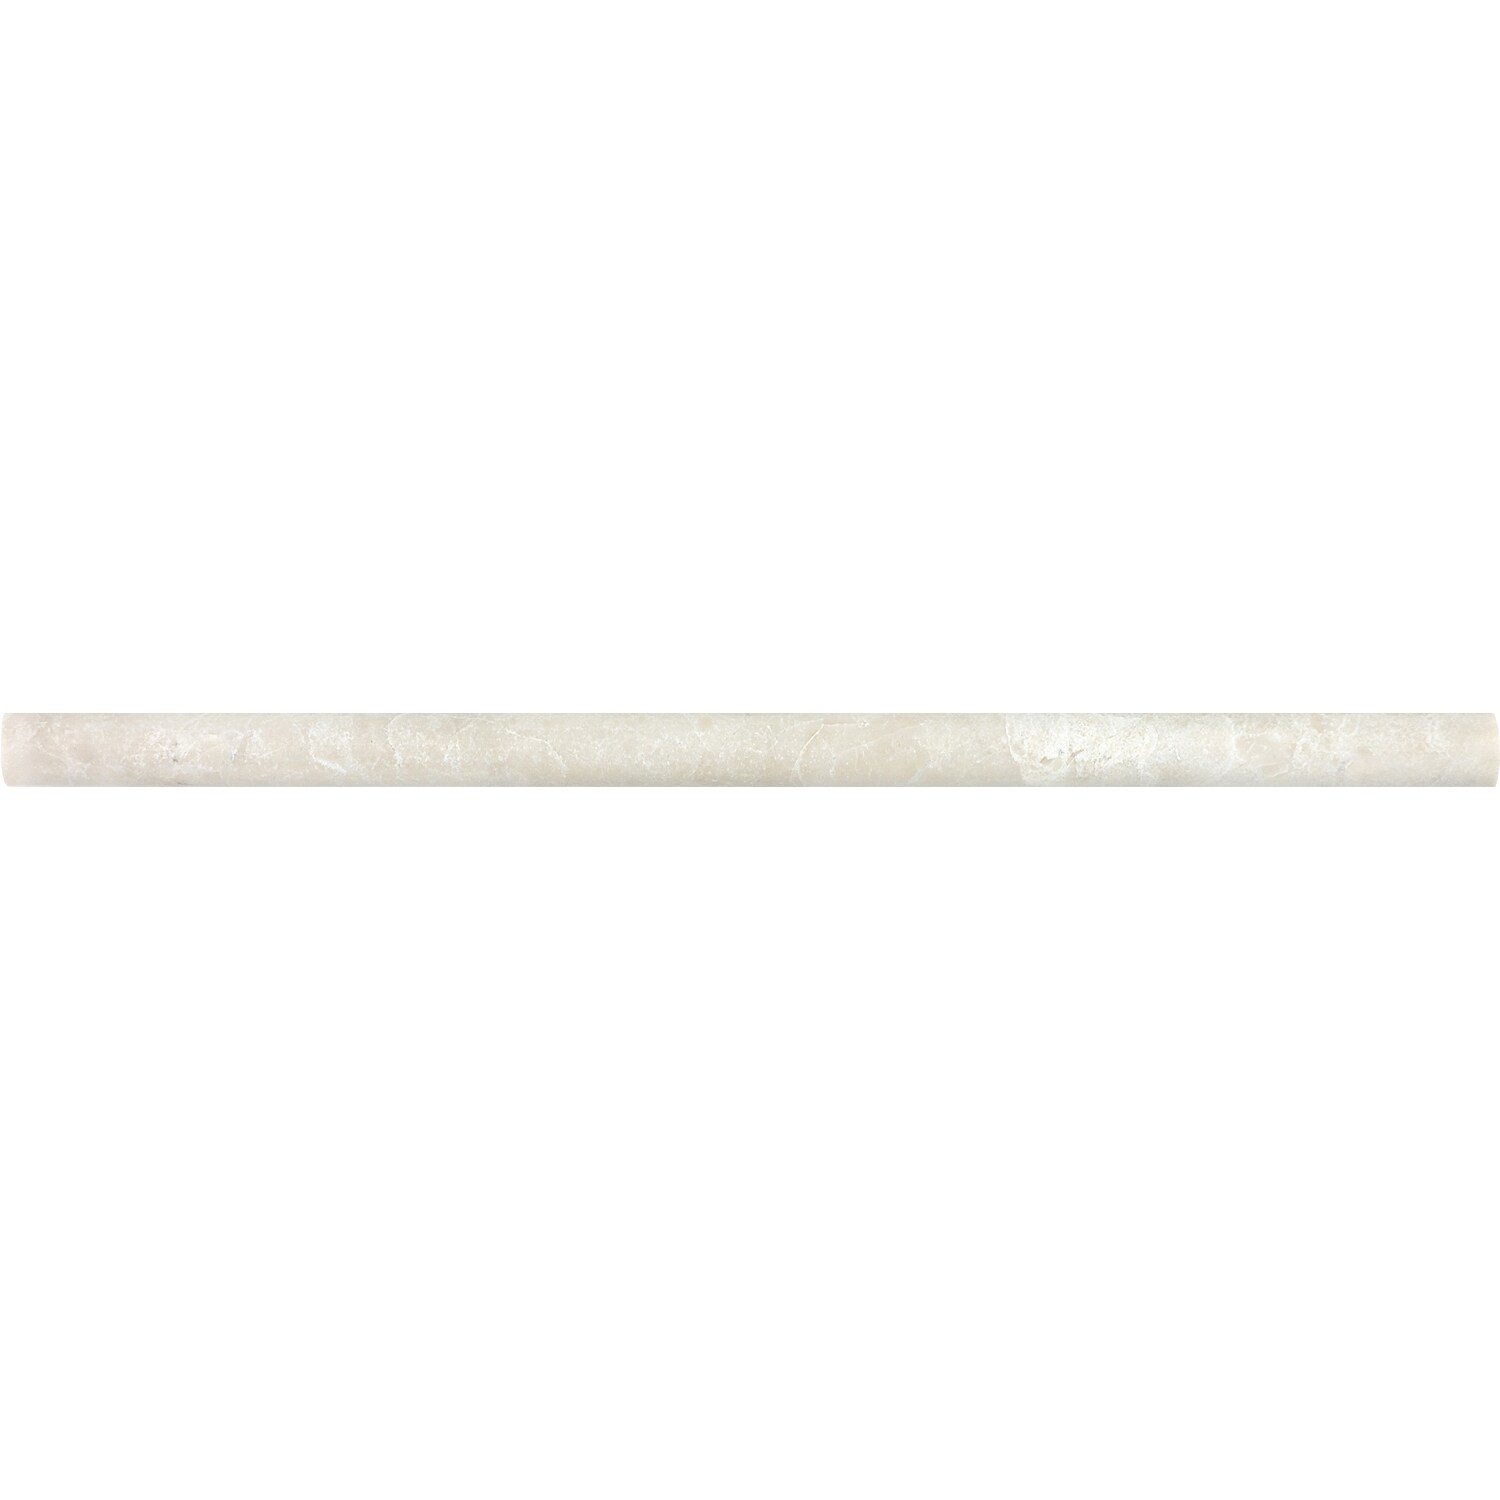 Anatolia Tile Crema Luna Natural Stone Marble Pencil Liner Tile 58 In X 12 In At